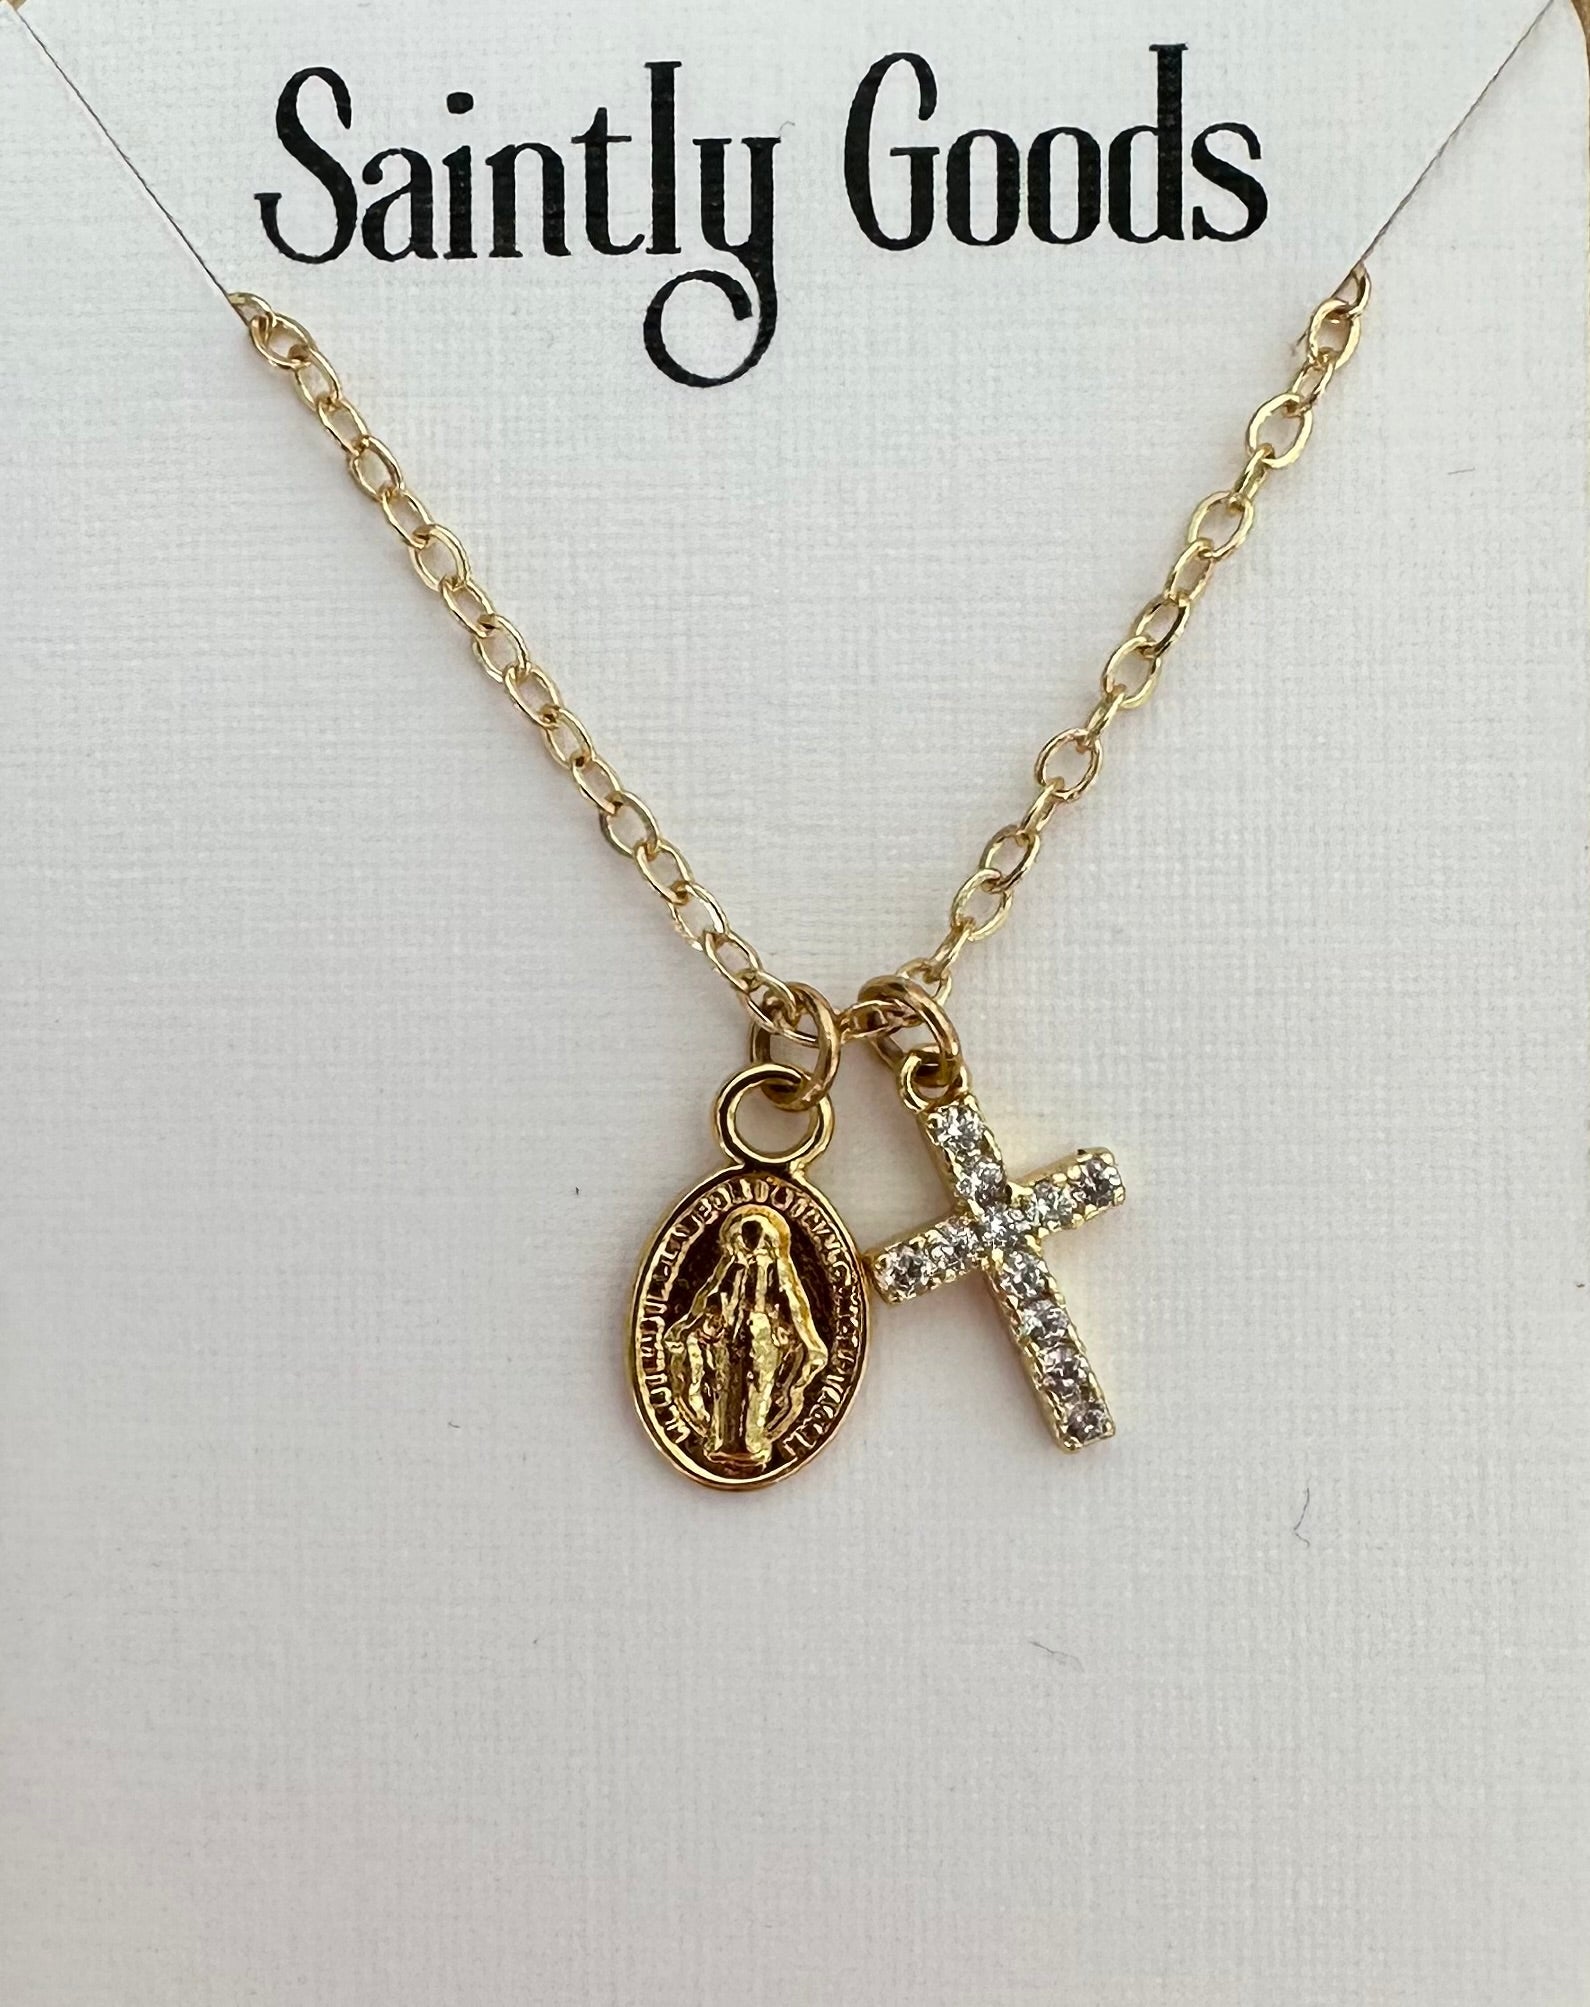 virgin mary necklace, gold mary necklace, gold mary jewelry, madonna necklace, blessed mother, baptism gift, communion gift for her, confirmation gift for her, miraculous medal necklace, dainty tiny virgin mary necklace, religious necklace, protection necklace, catholic jewelry, catholic gifts for her, christian gift for her, crystal cross, 14k gold mary necklace, mother's day gift, christian birthday gift, catholic birthday gift, mary necklace